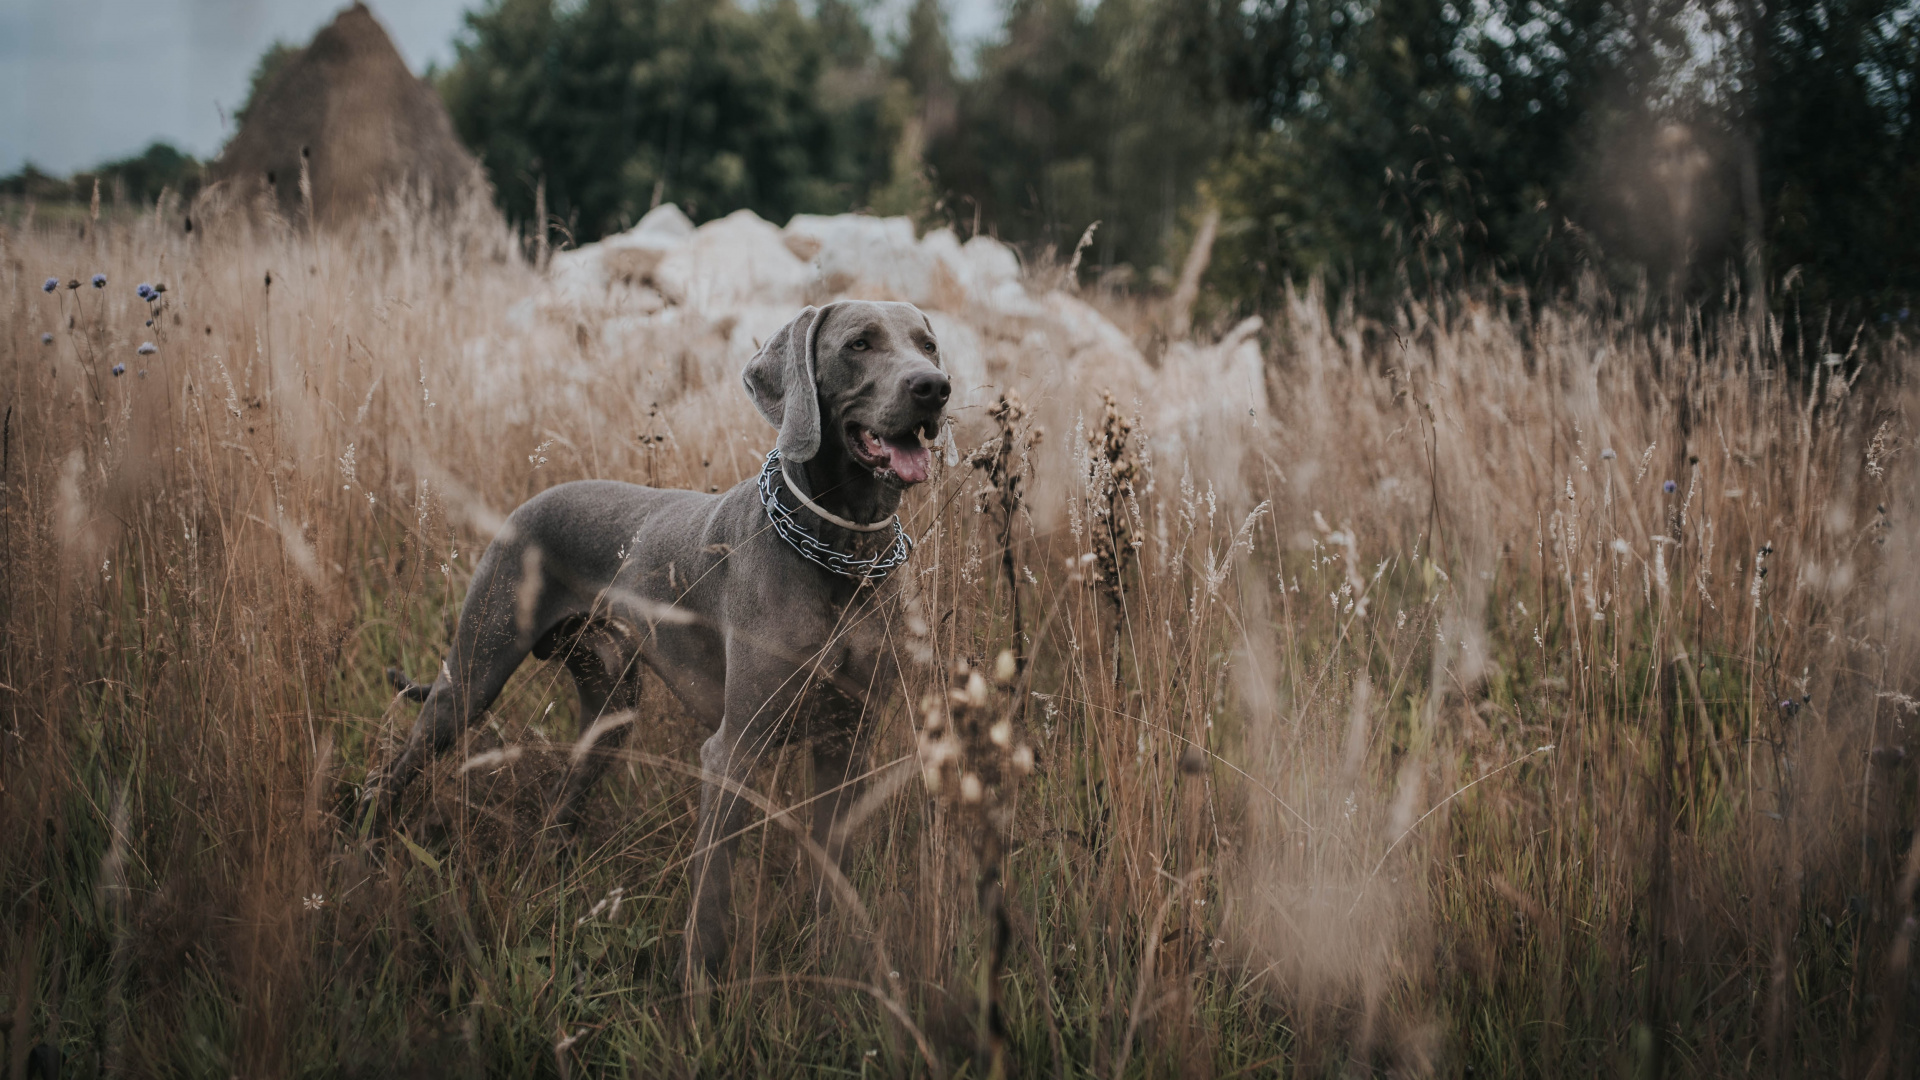 Gray Short Coated Dog on Brown Grass Field During Daytime. Wallpaper in 1920x1080 Resolution